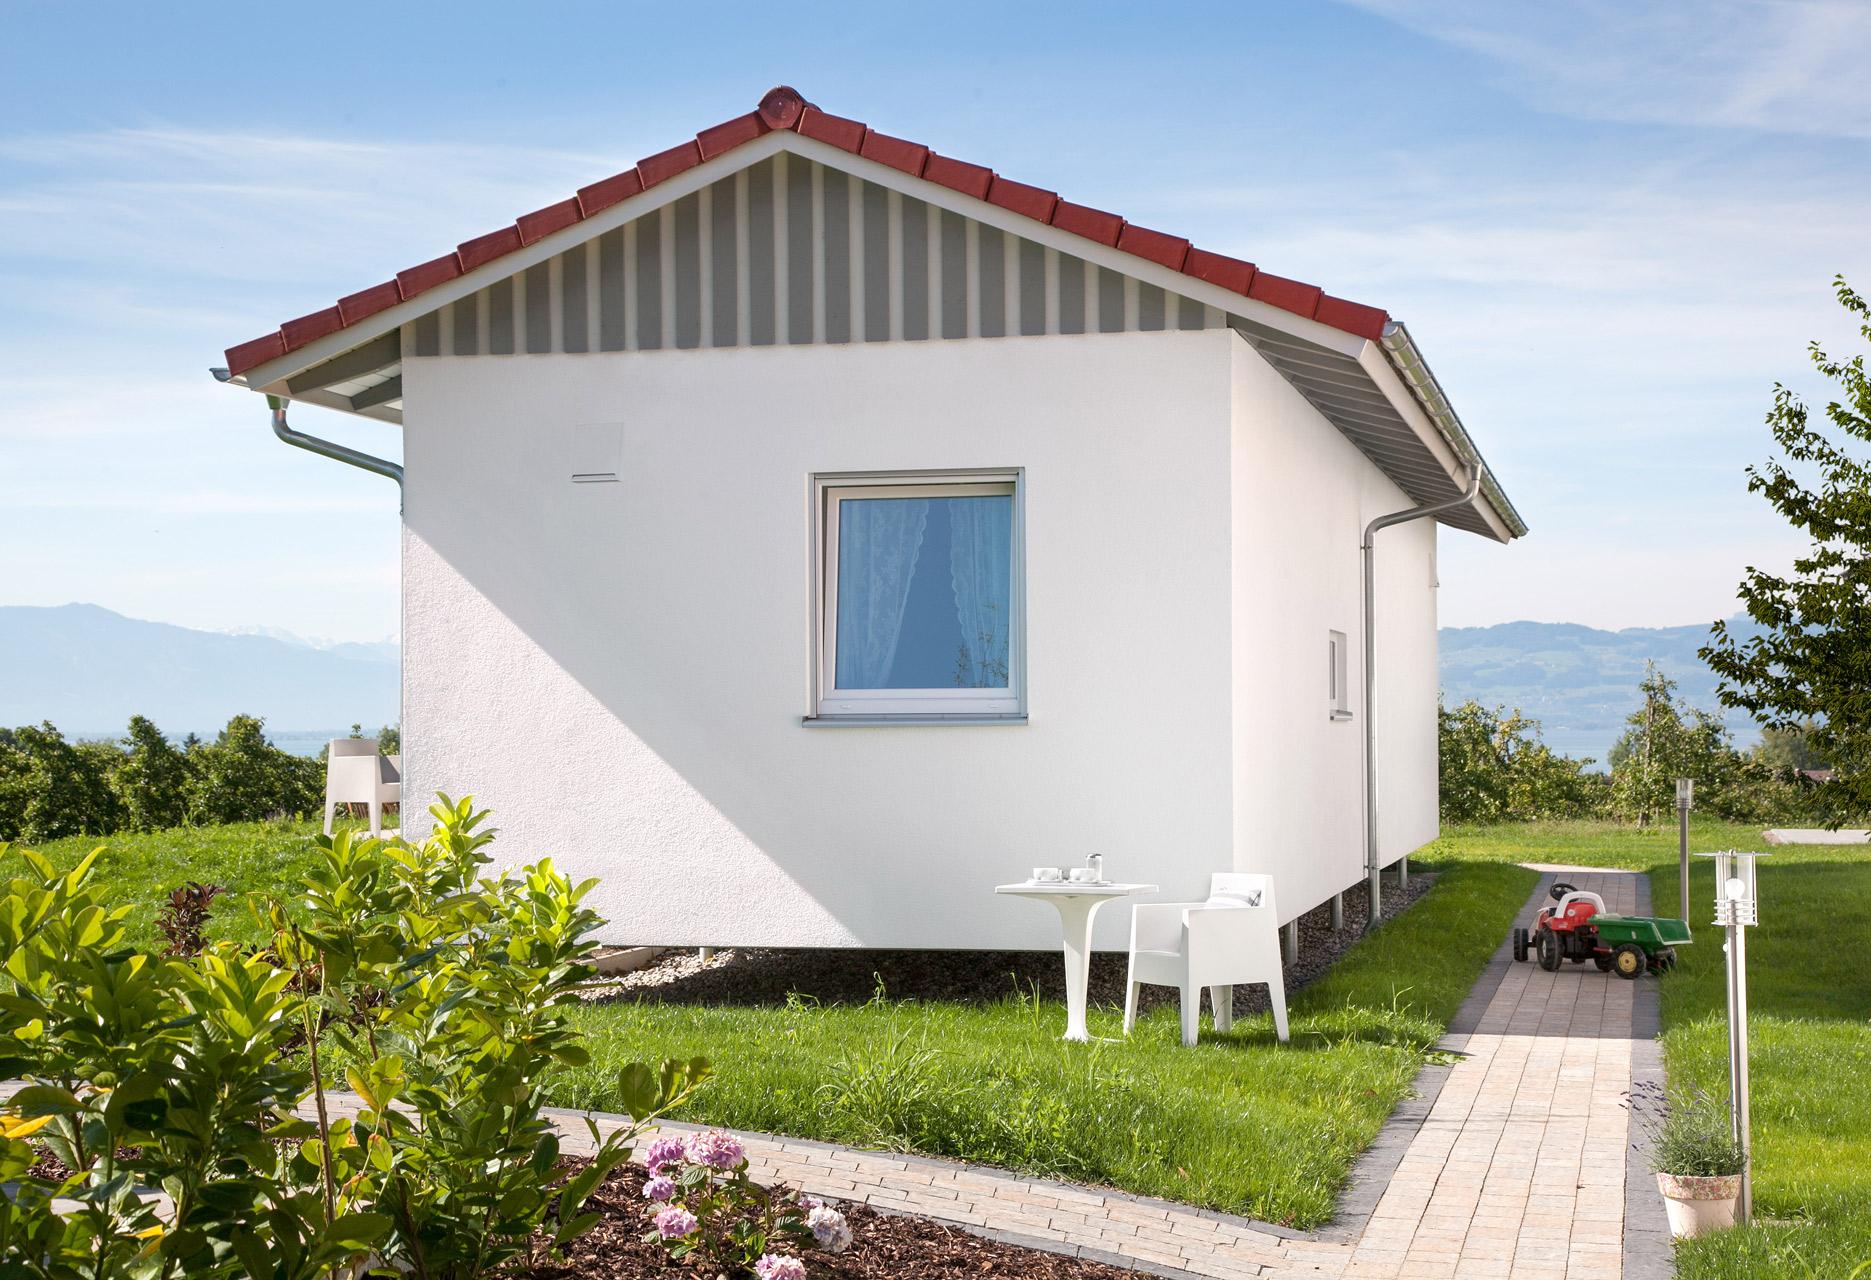 FlyingSpace holiday homes on Lake Constance